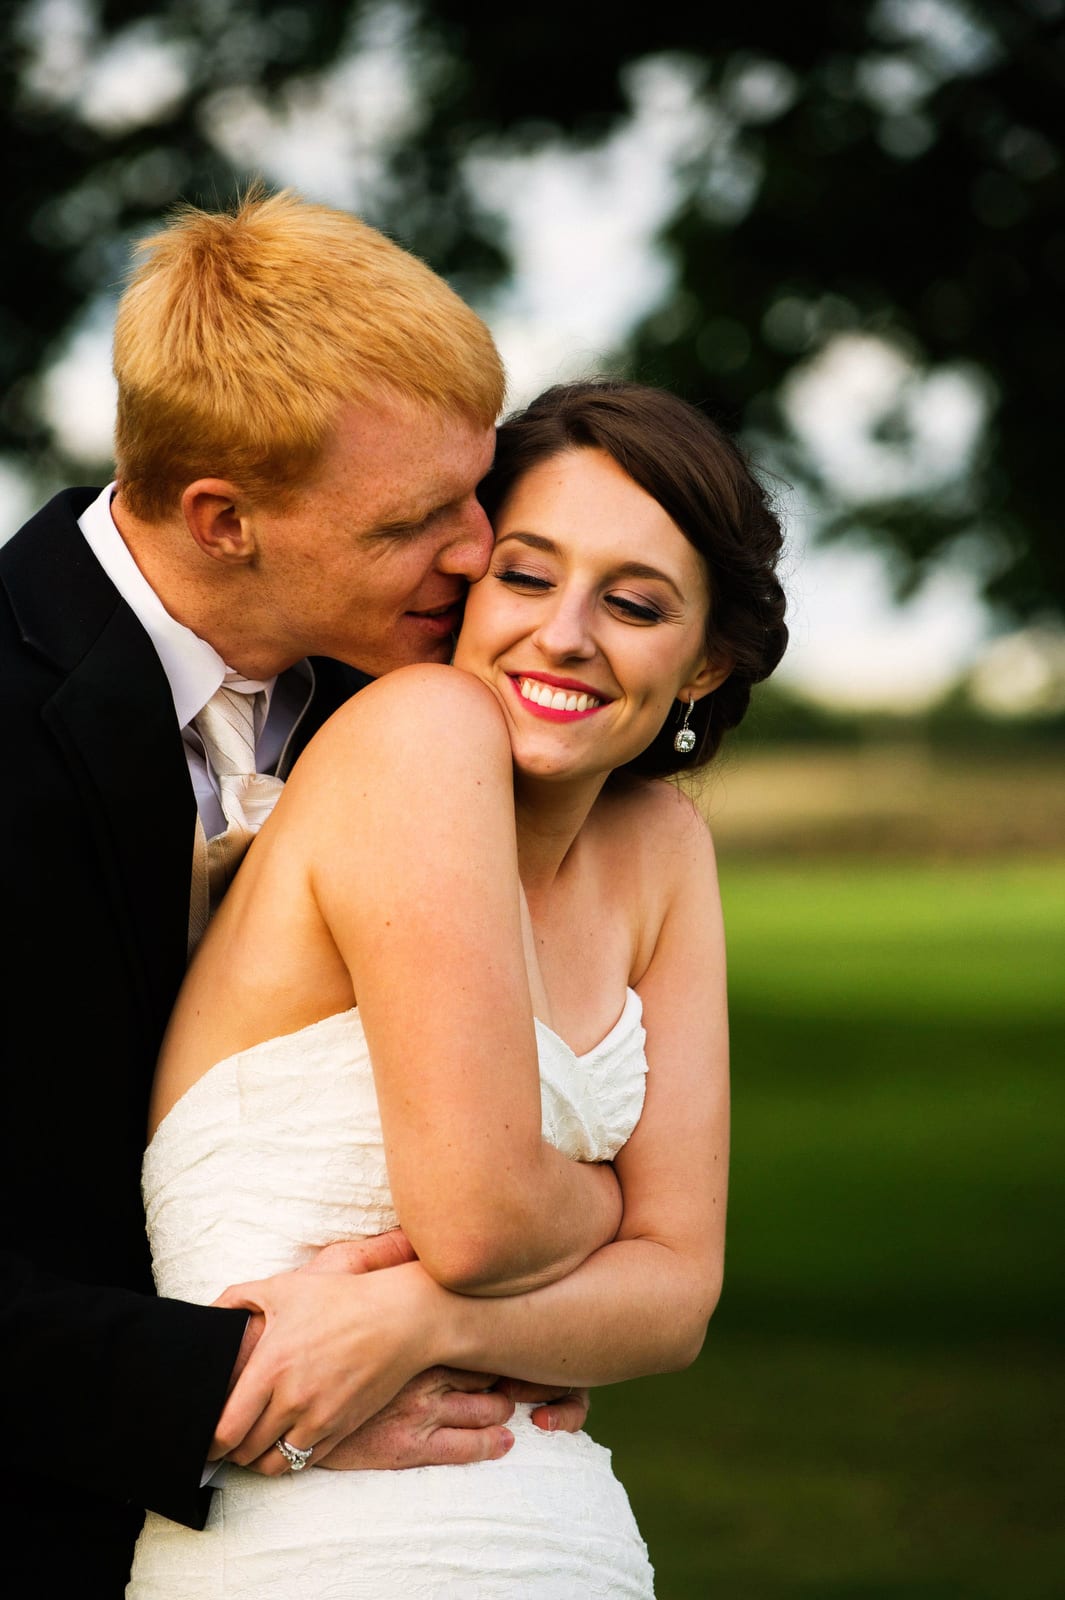 A bride smiles and looks back at her red-headed groom as he holds her from behind and kisses her on the cheek during their wedding at the Montour Heights Country Club.